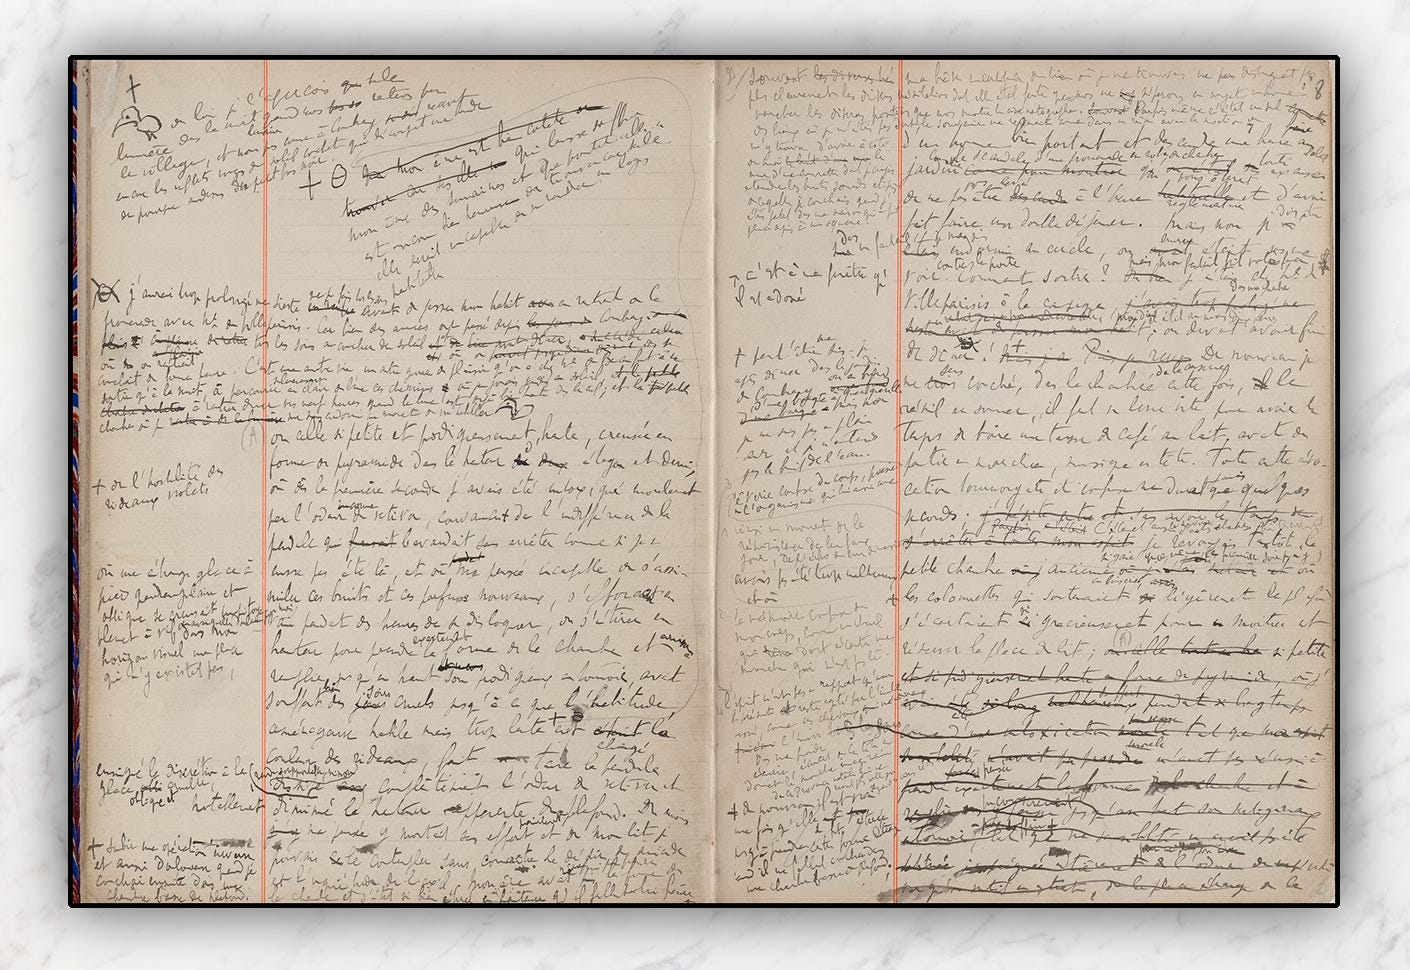 The manuscripts of the Madeleine by Marcel Proust